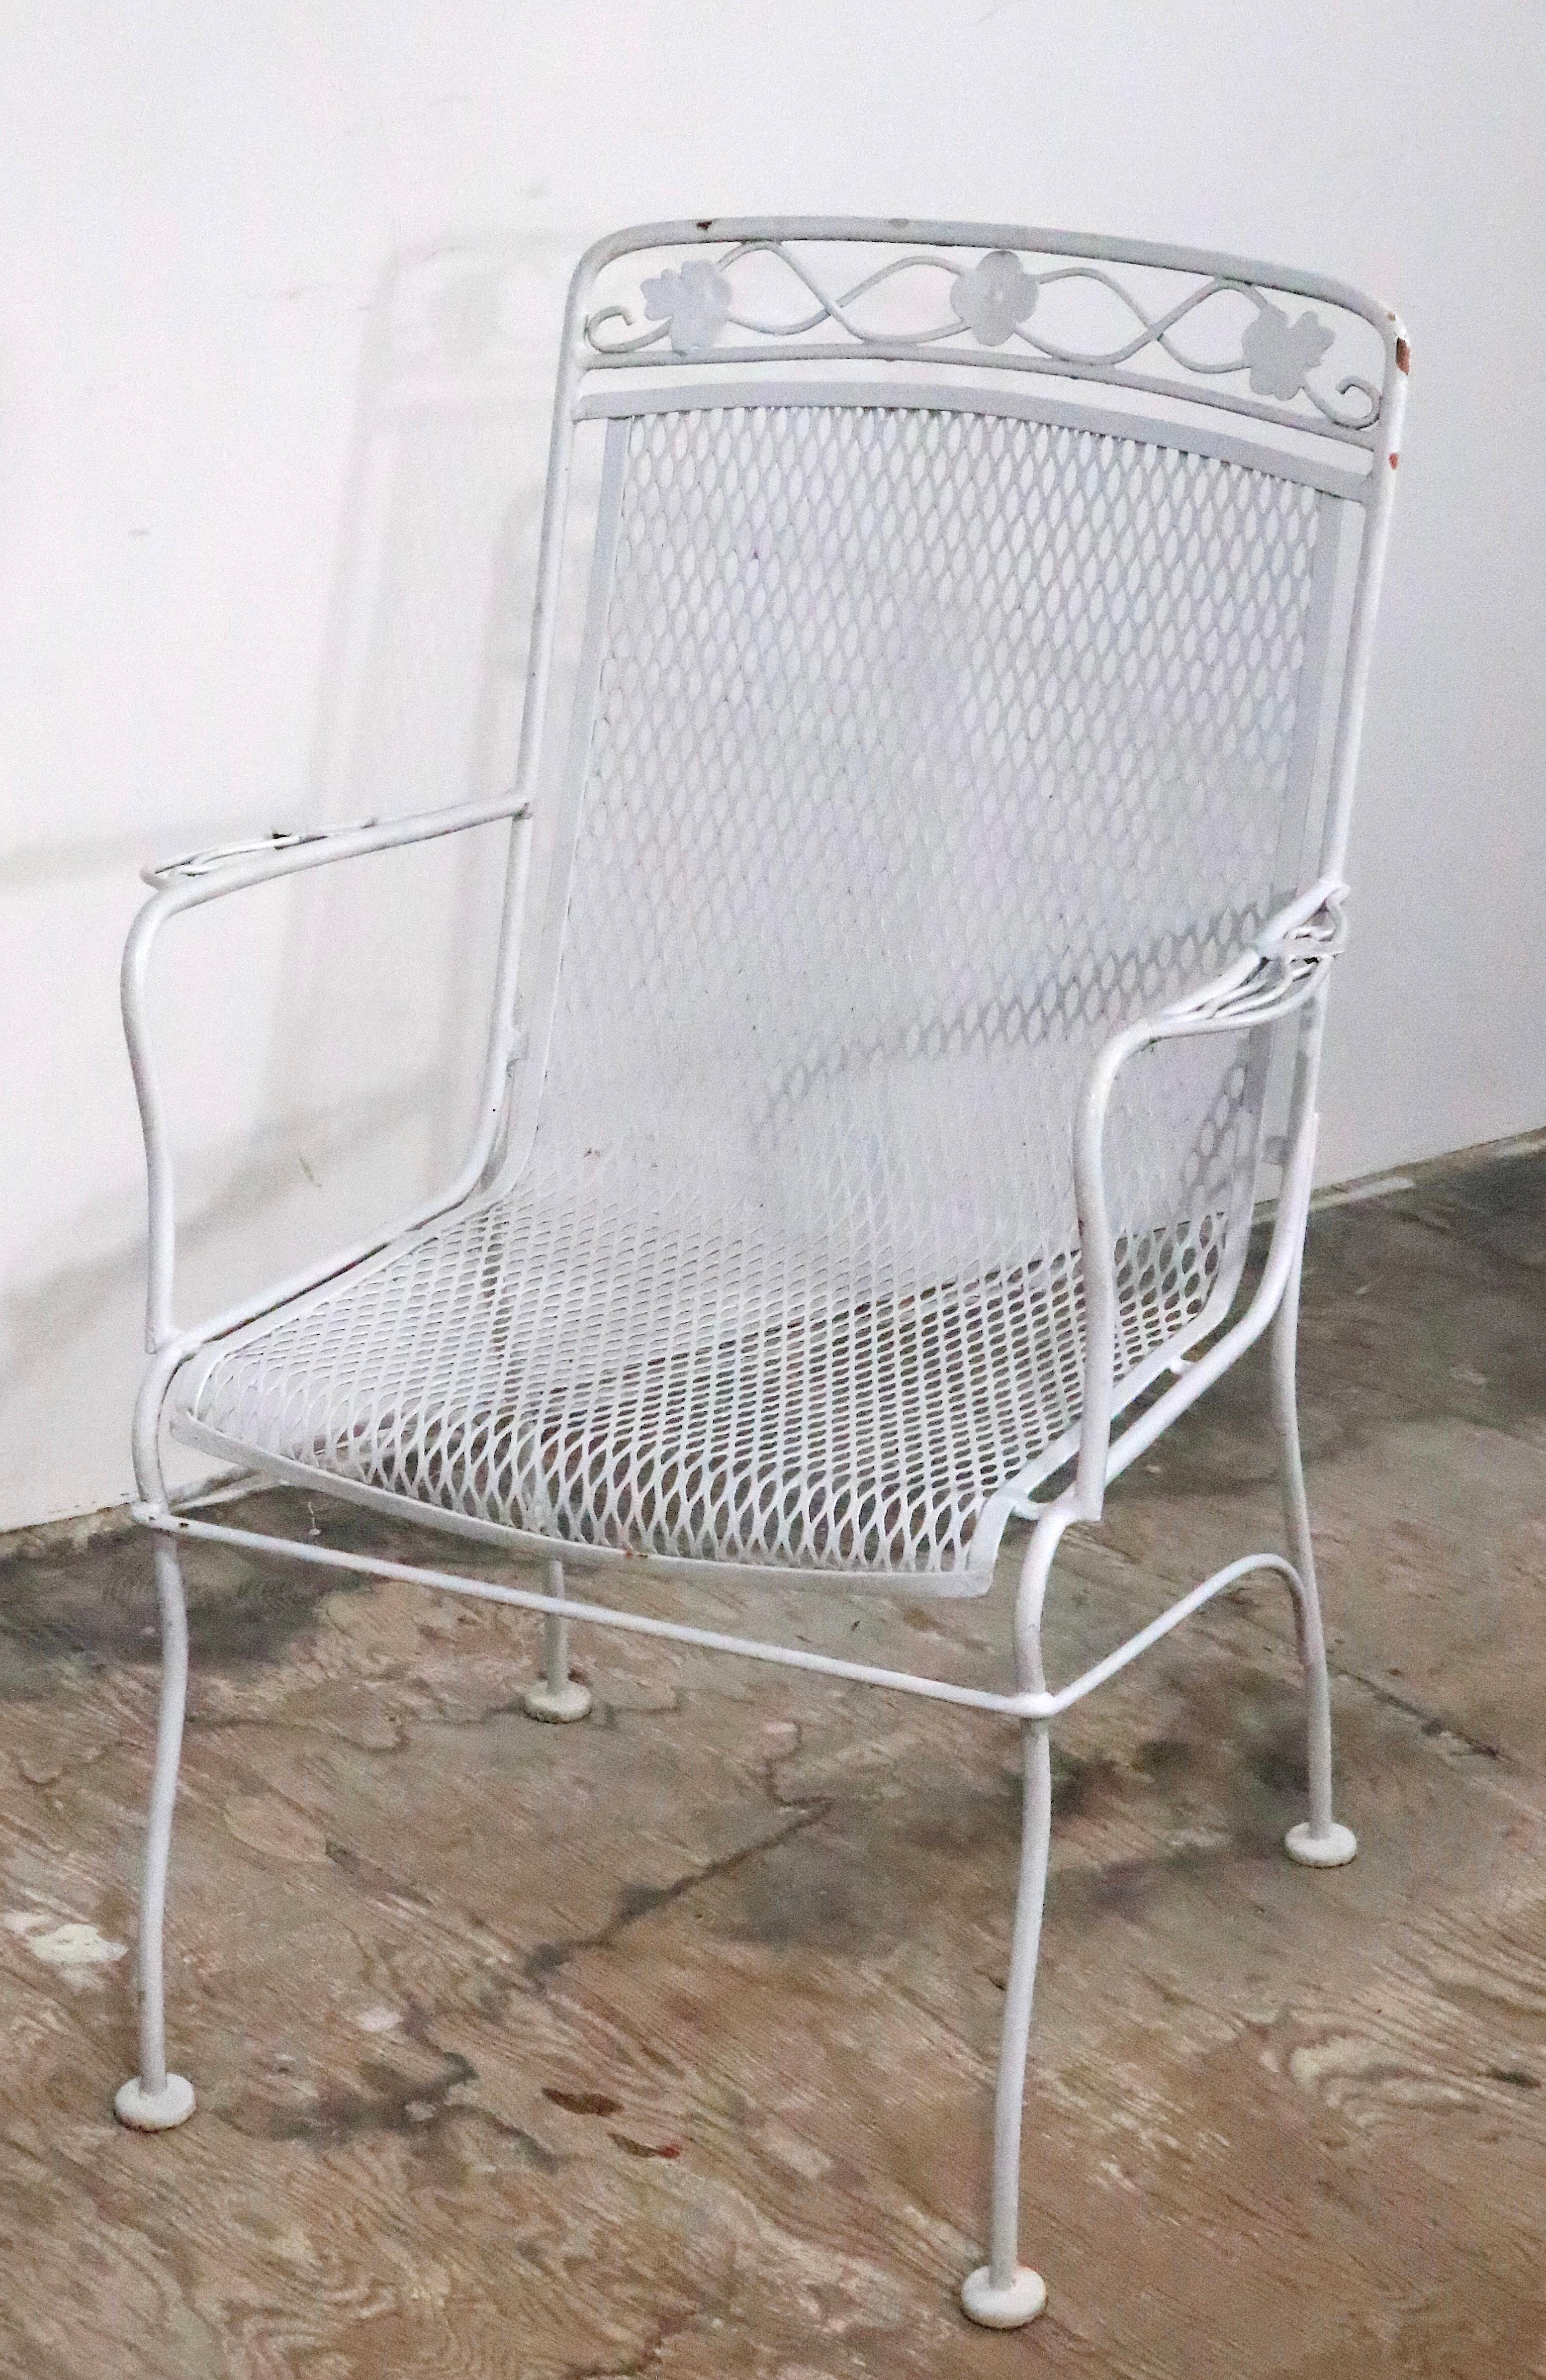 Mid-Century Modern Pr. Wrought Iron Metal Mesh Garden Patio Poolside Chairs by Woodard c. 1950/70's For Sale